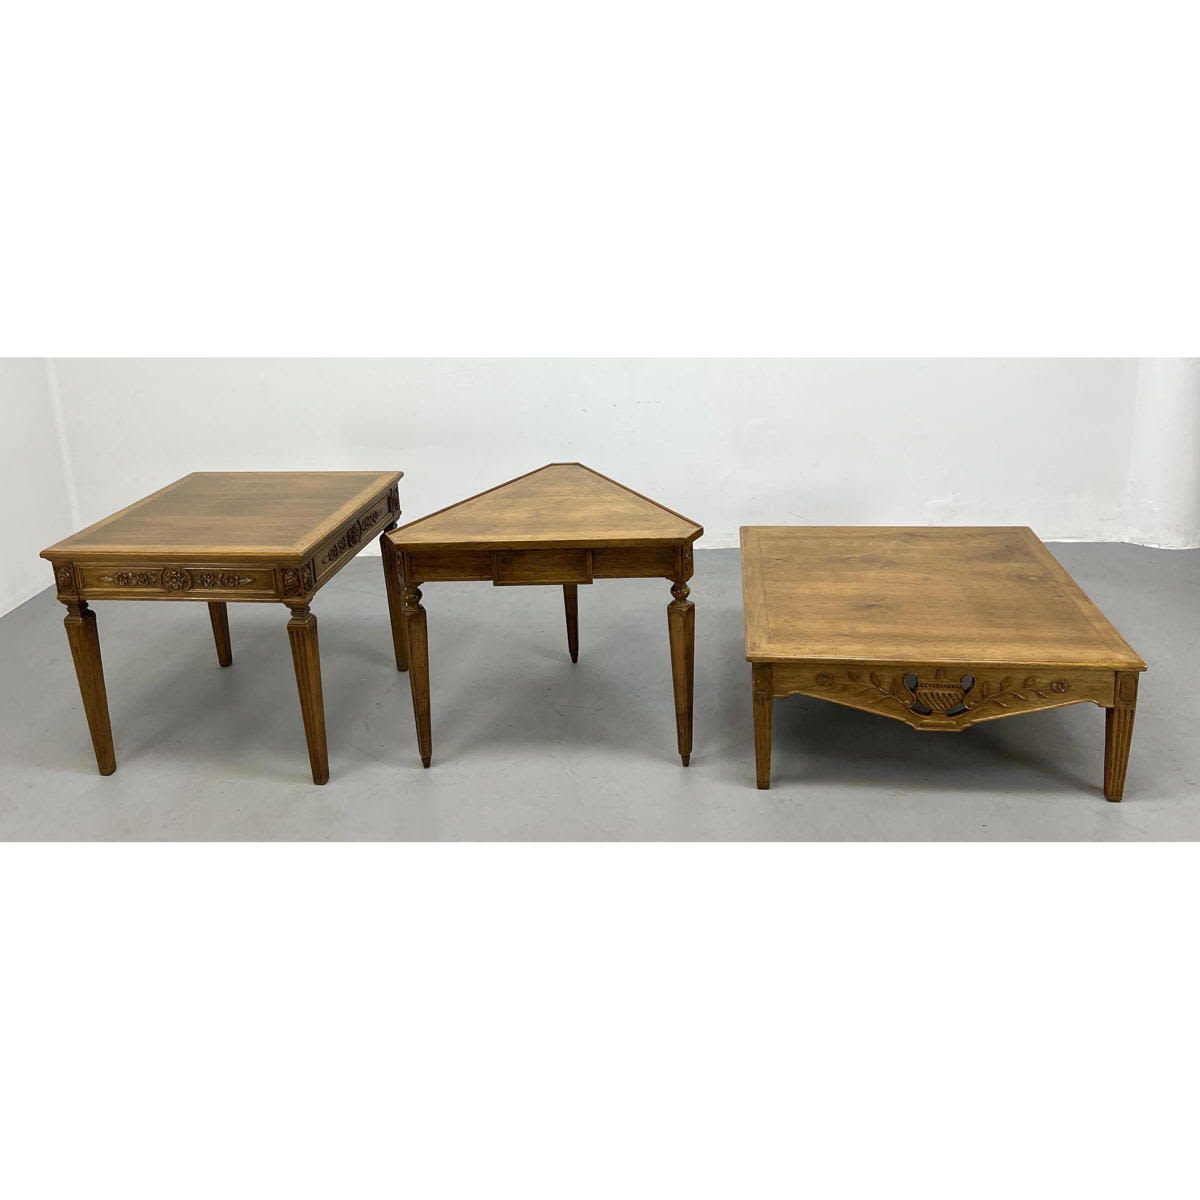 3pcs Country French Style Tables  2bafdf